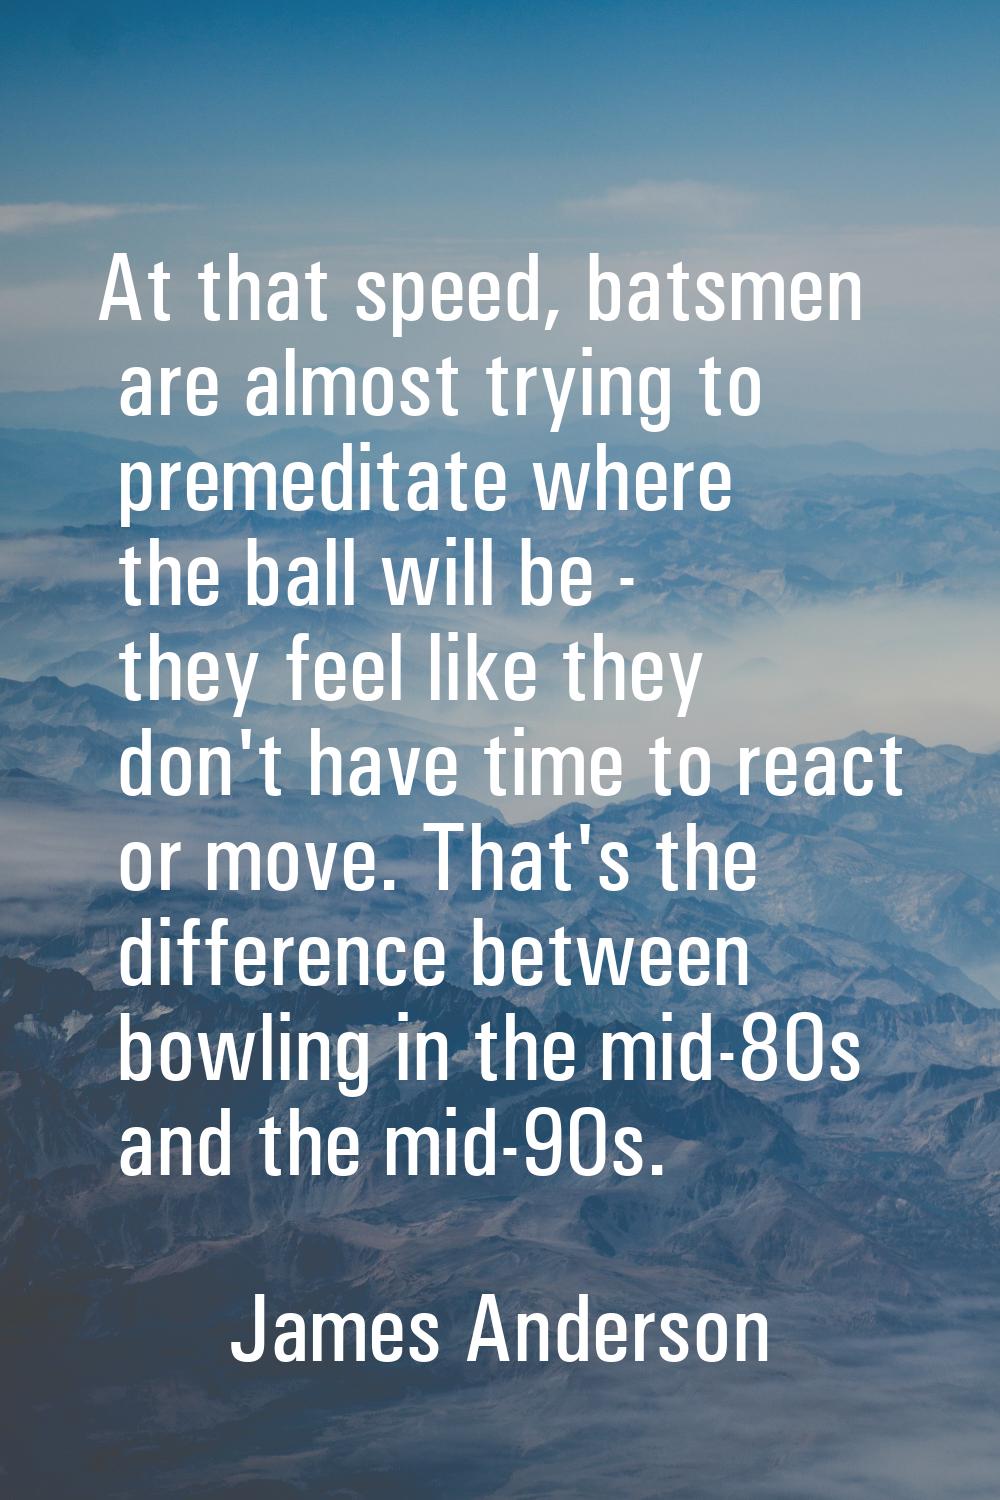 At that speed, batsmen are almost trying to premeditate where the ball will be - they feel like the